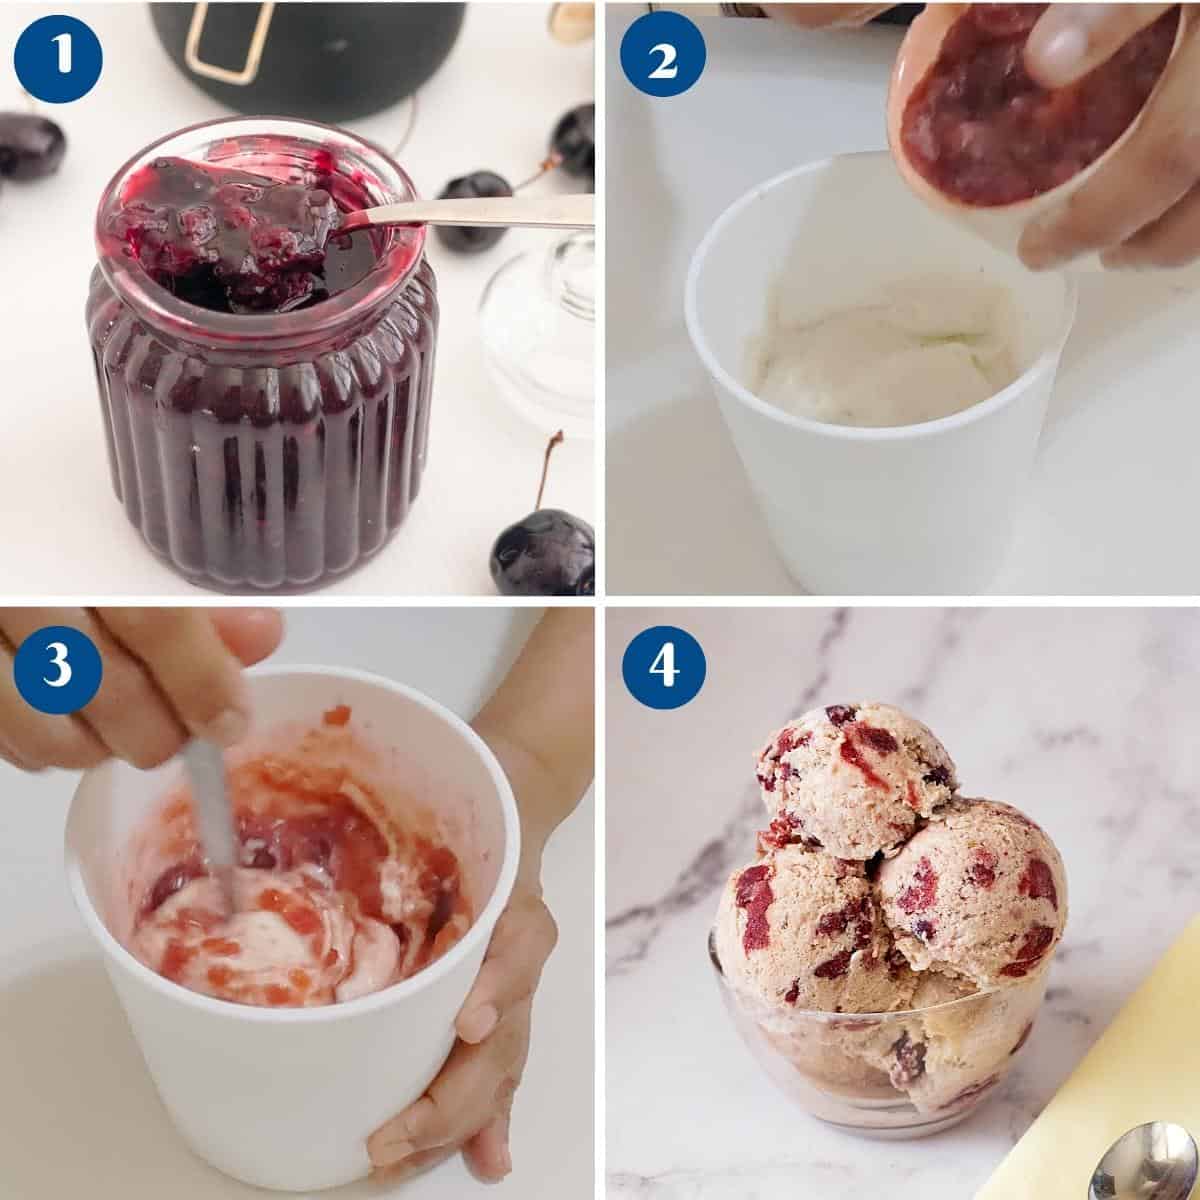 Progress pictures making ice cream with banana and cherry.